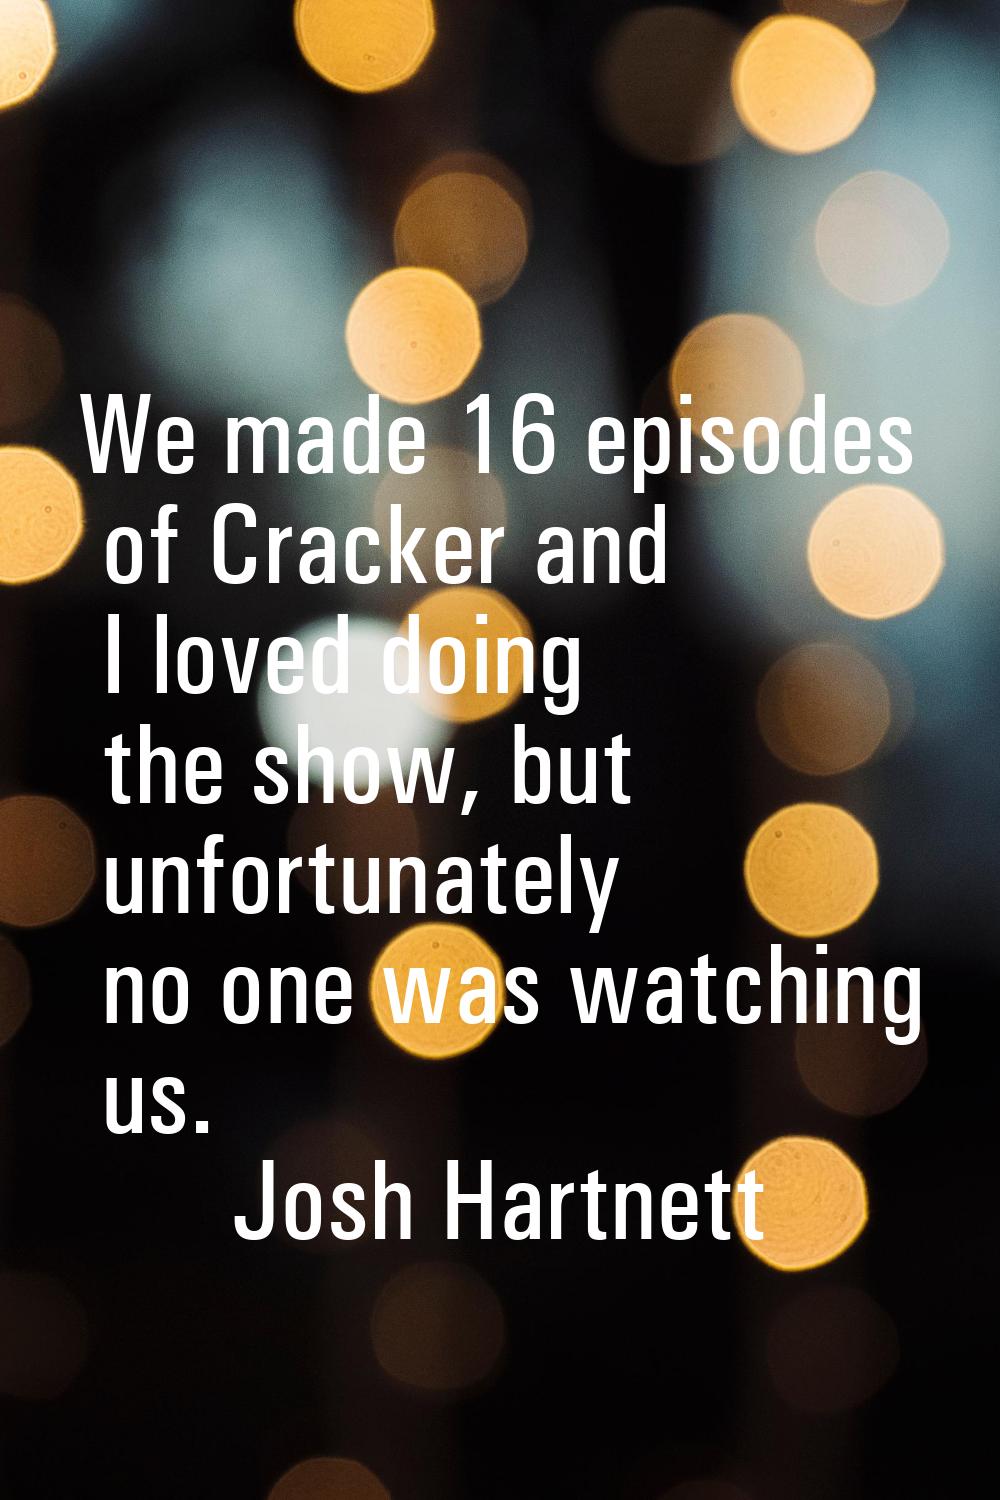 We made 16 episodes of Cracker and I loved doing the show, but unfortunately no one was watching us